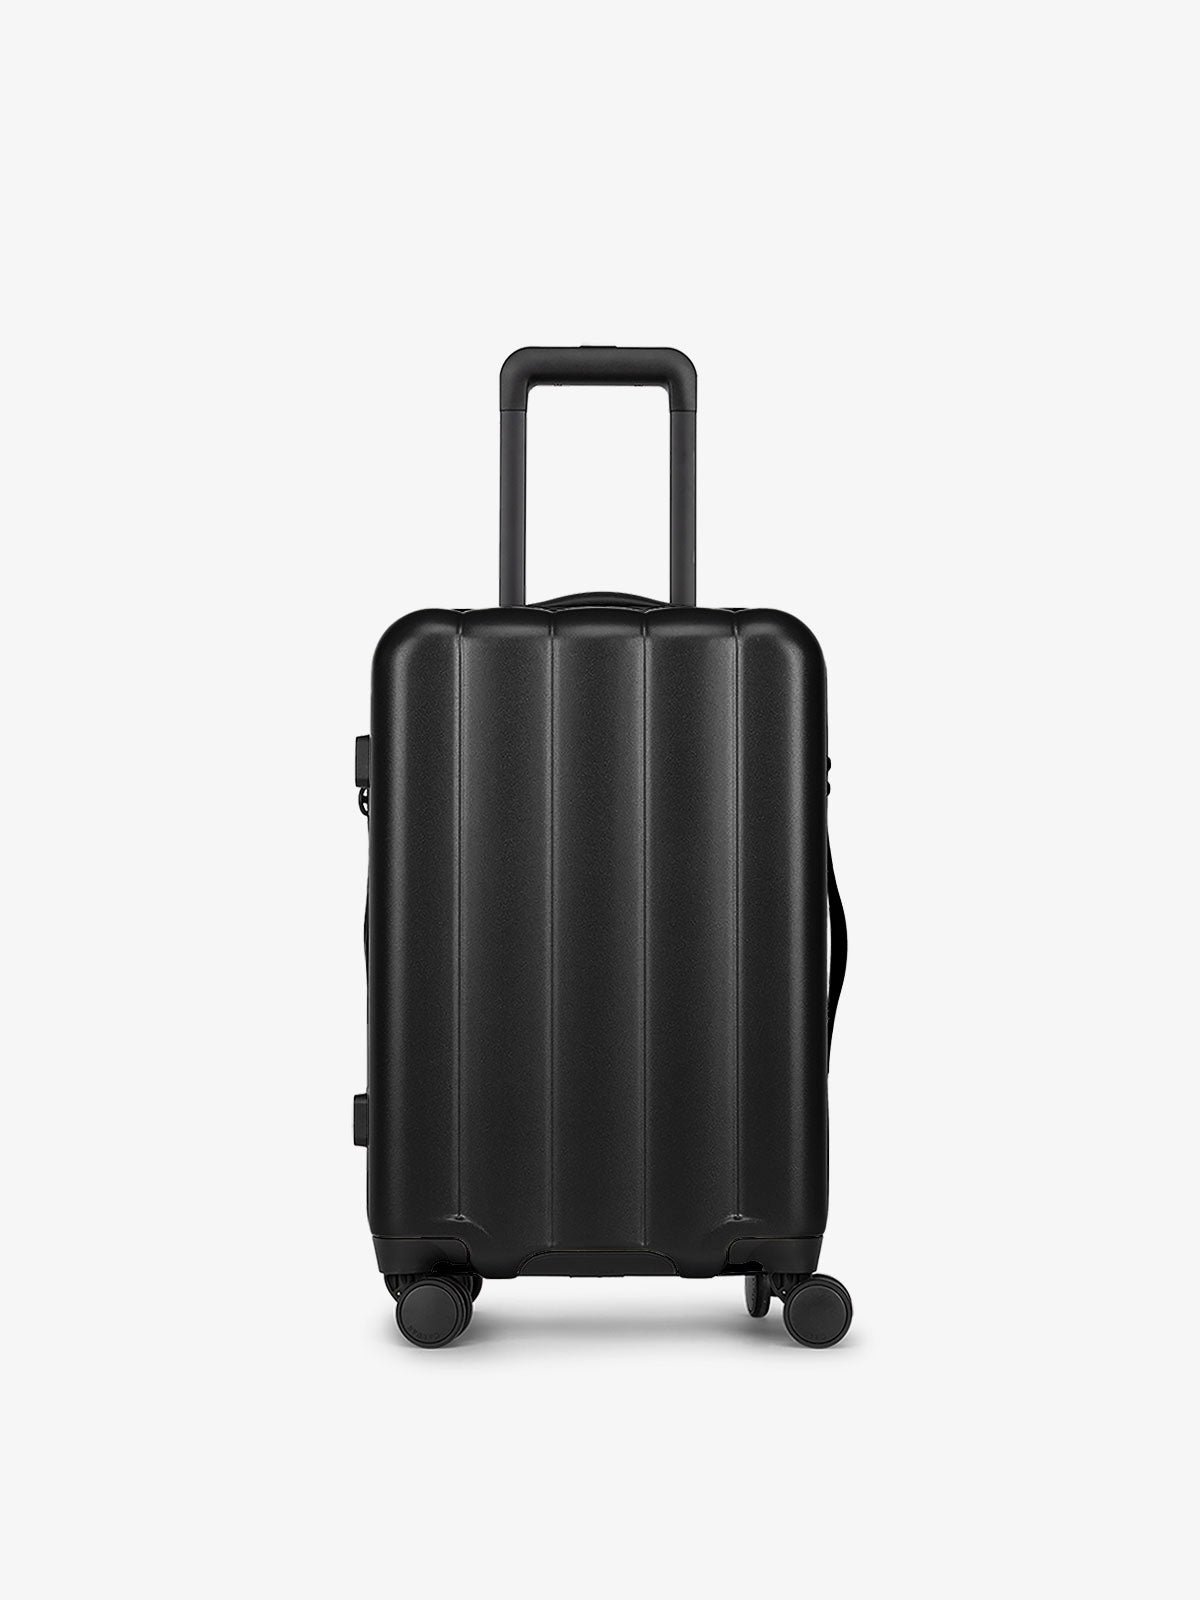 Black carry-on luggage made from an ultra-durable polycarbonate shell and expandable by up to 2"